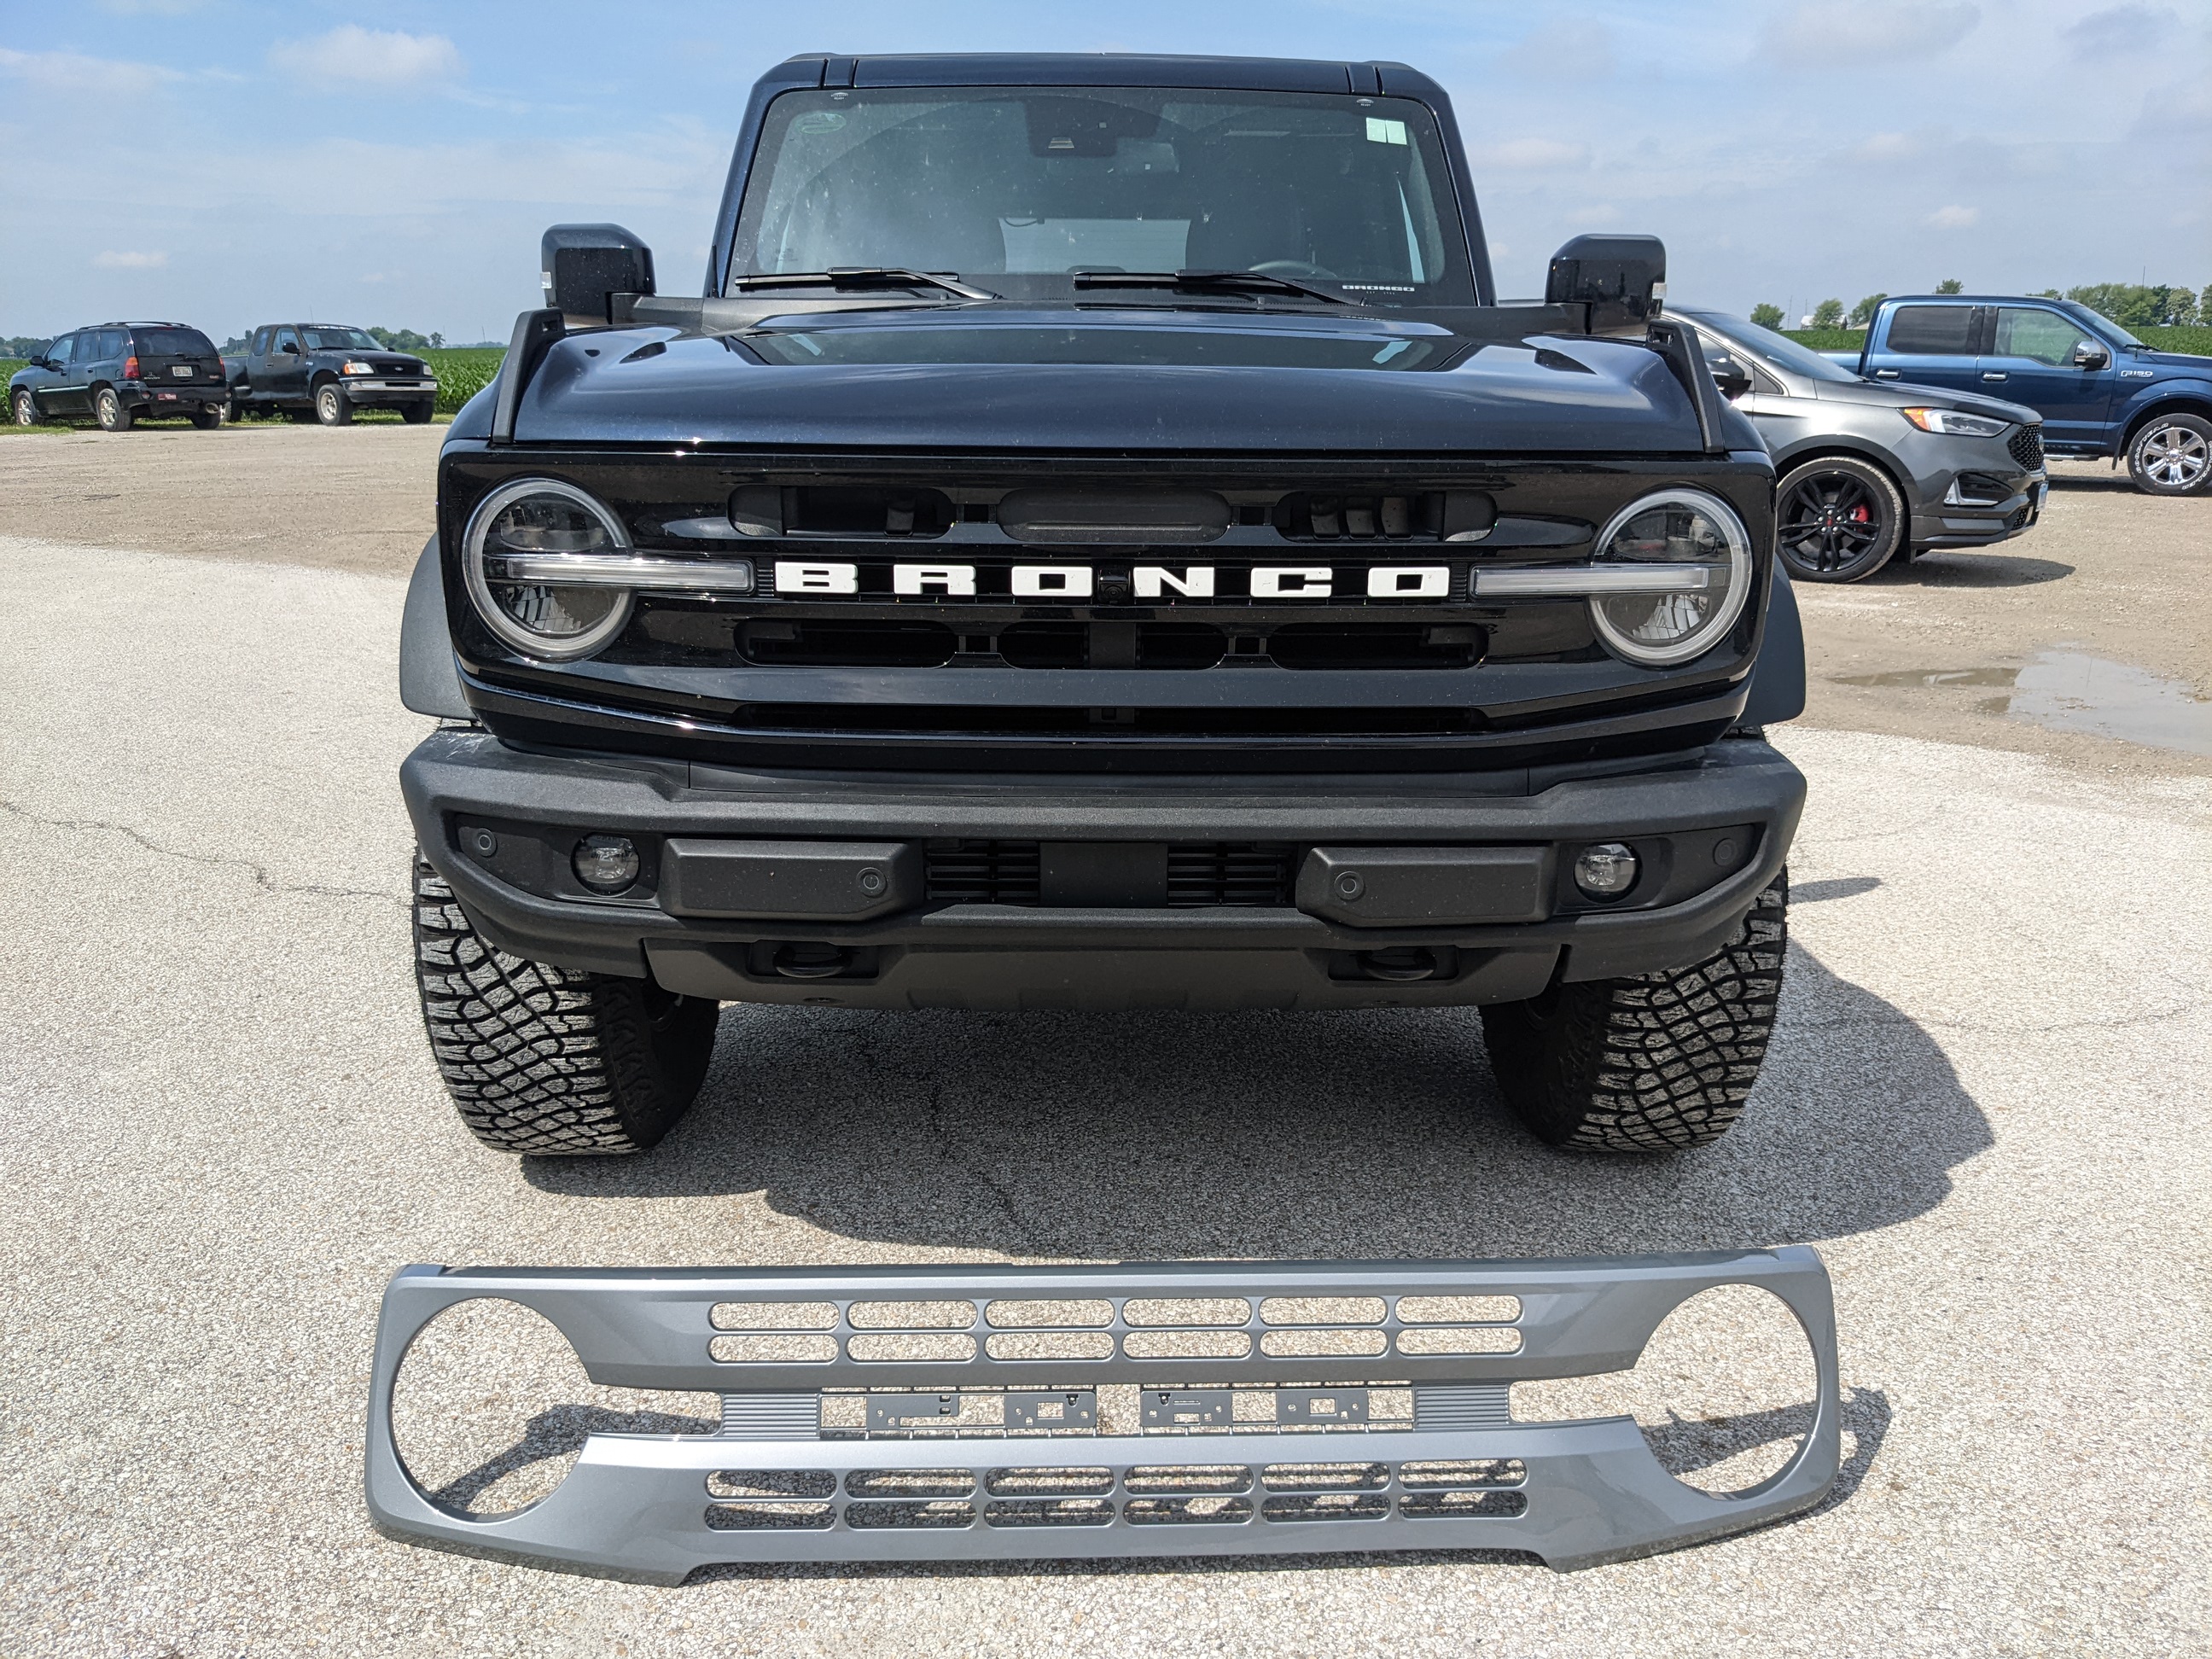 Ford Bronco Custom Heritage Grill in Solar Silver + Oracle letter lights added to my Bronco! PXL_20220611_152523851